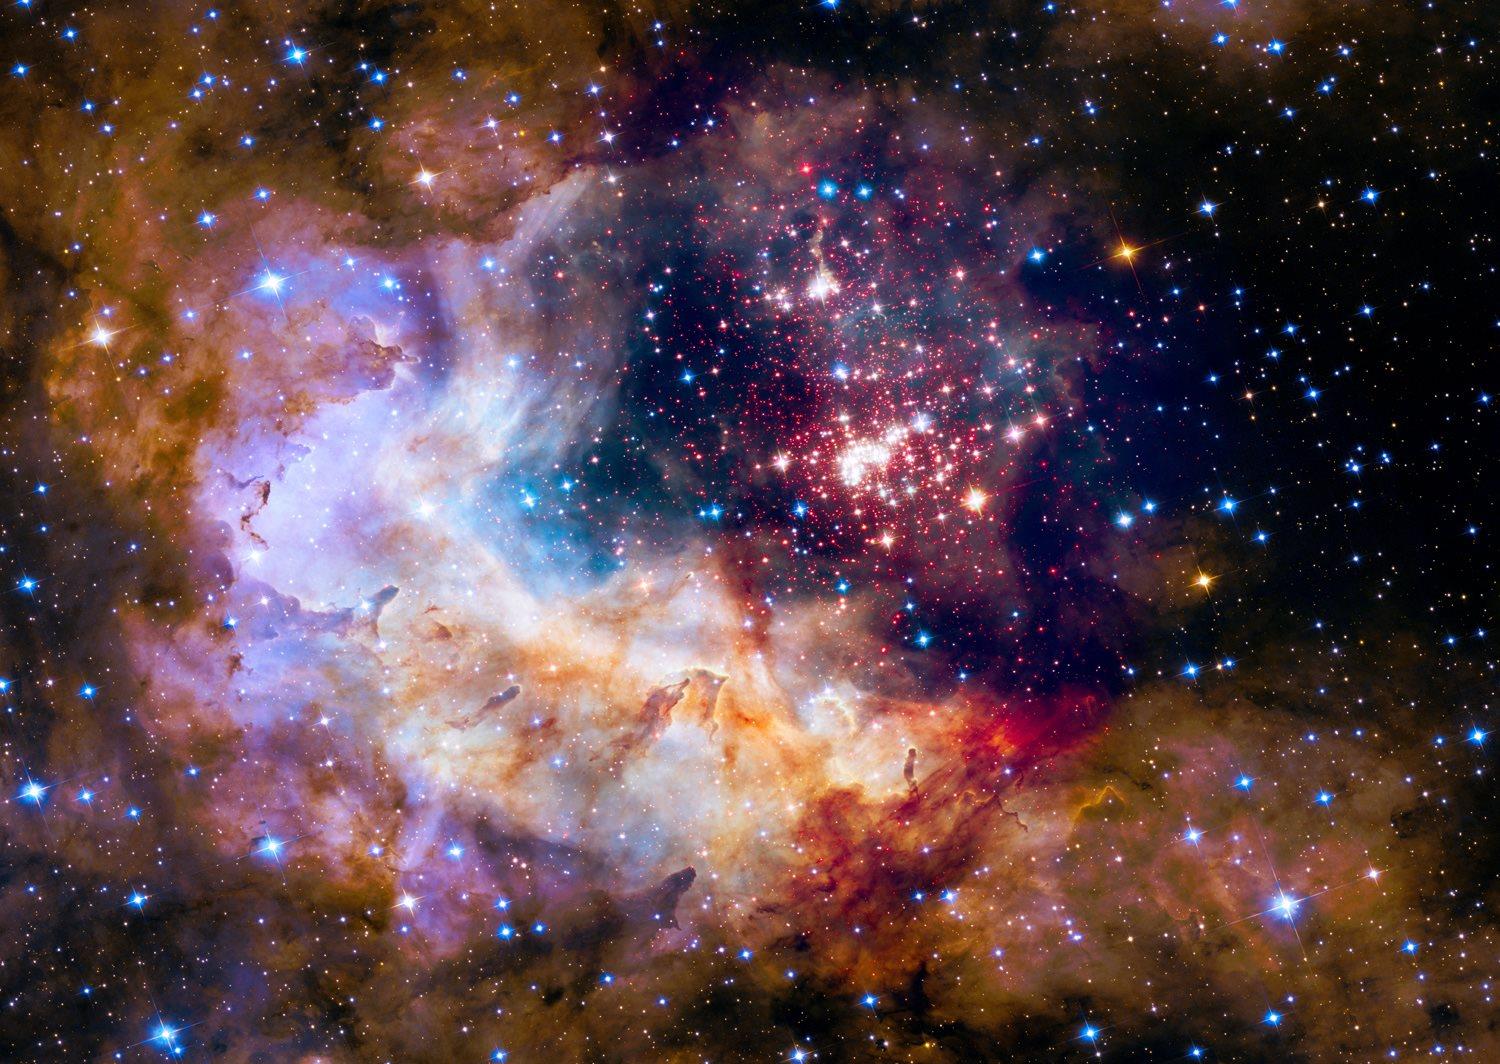 Enjoy Star Cluster in the Milky Way Galaxy Jigsaw Puzzle (1000 Pieces)